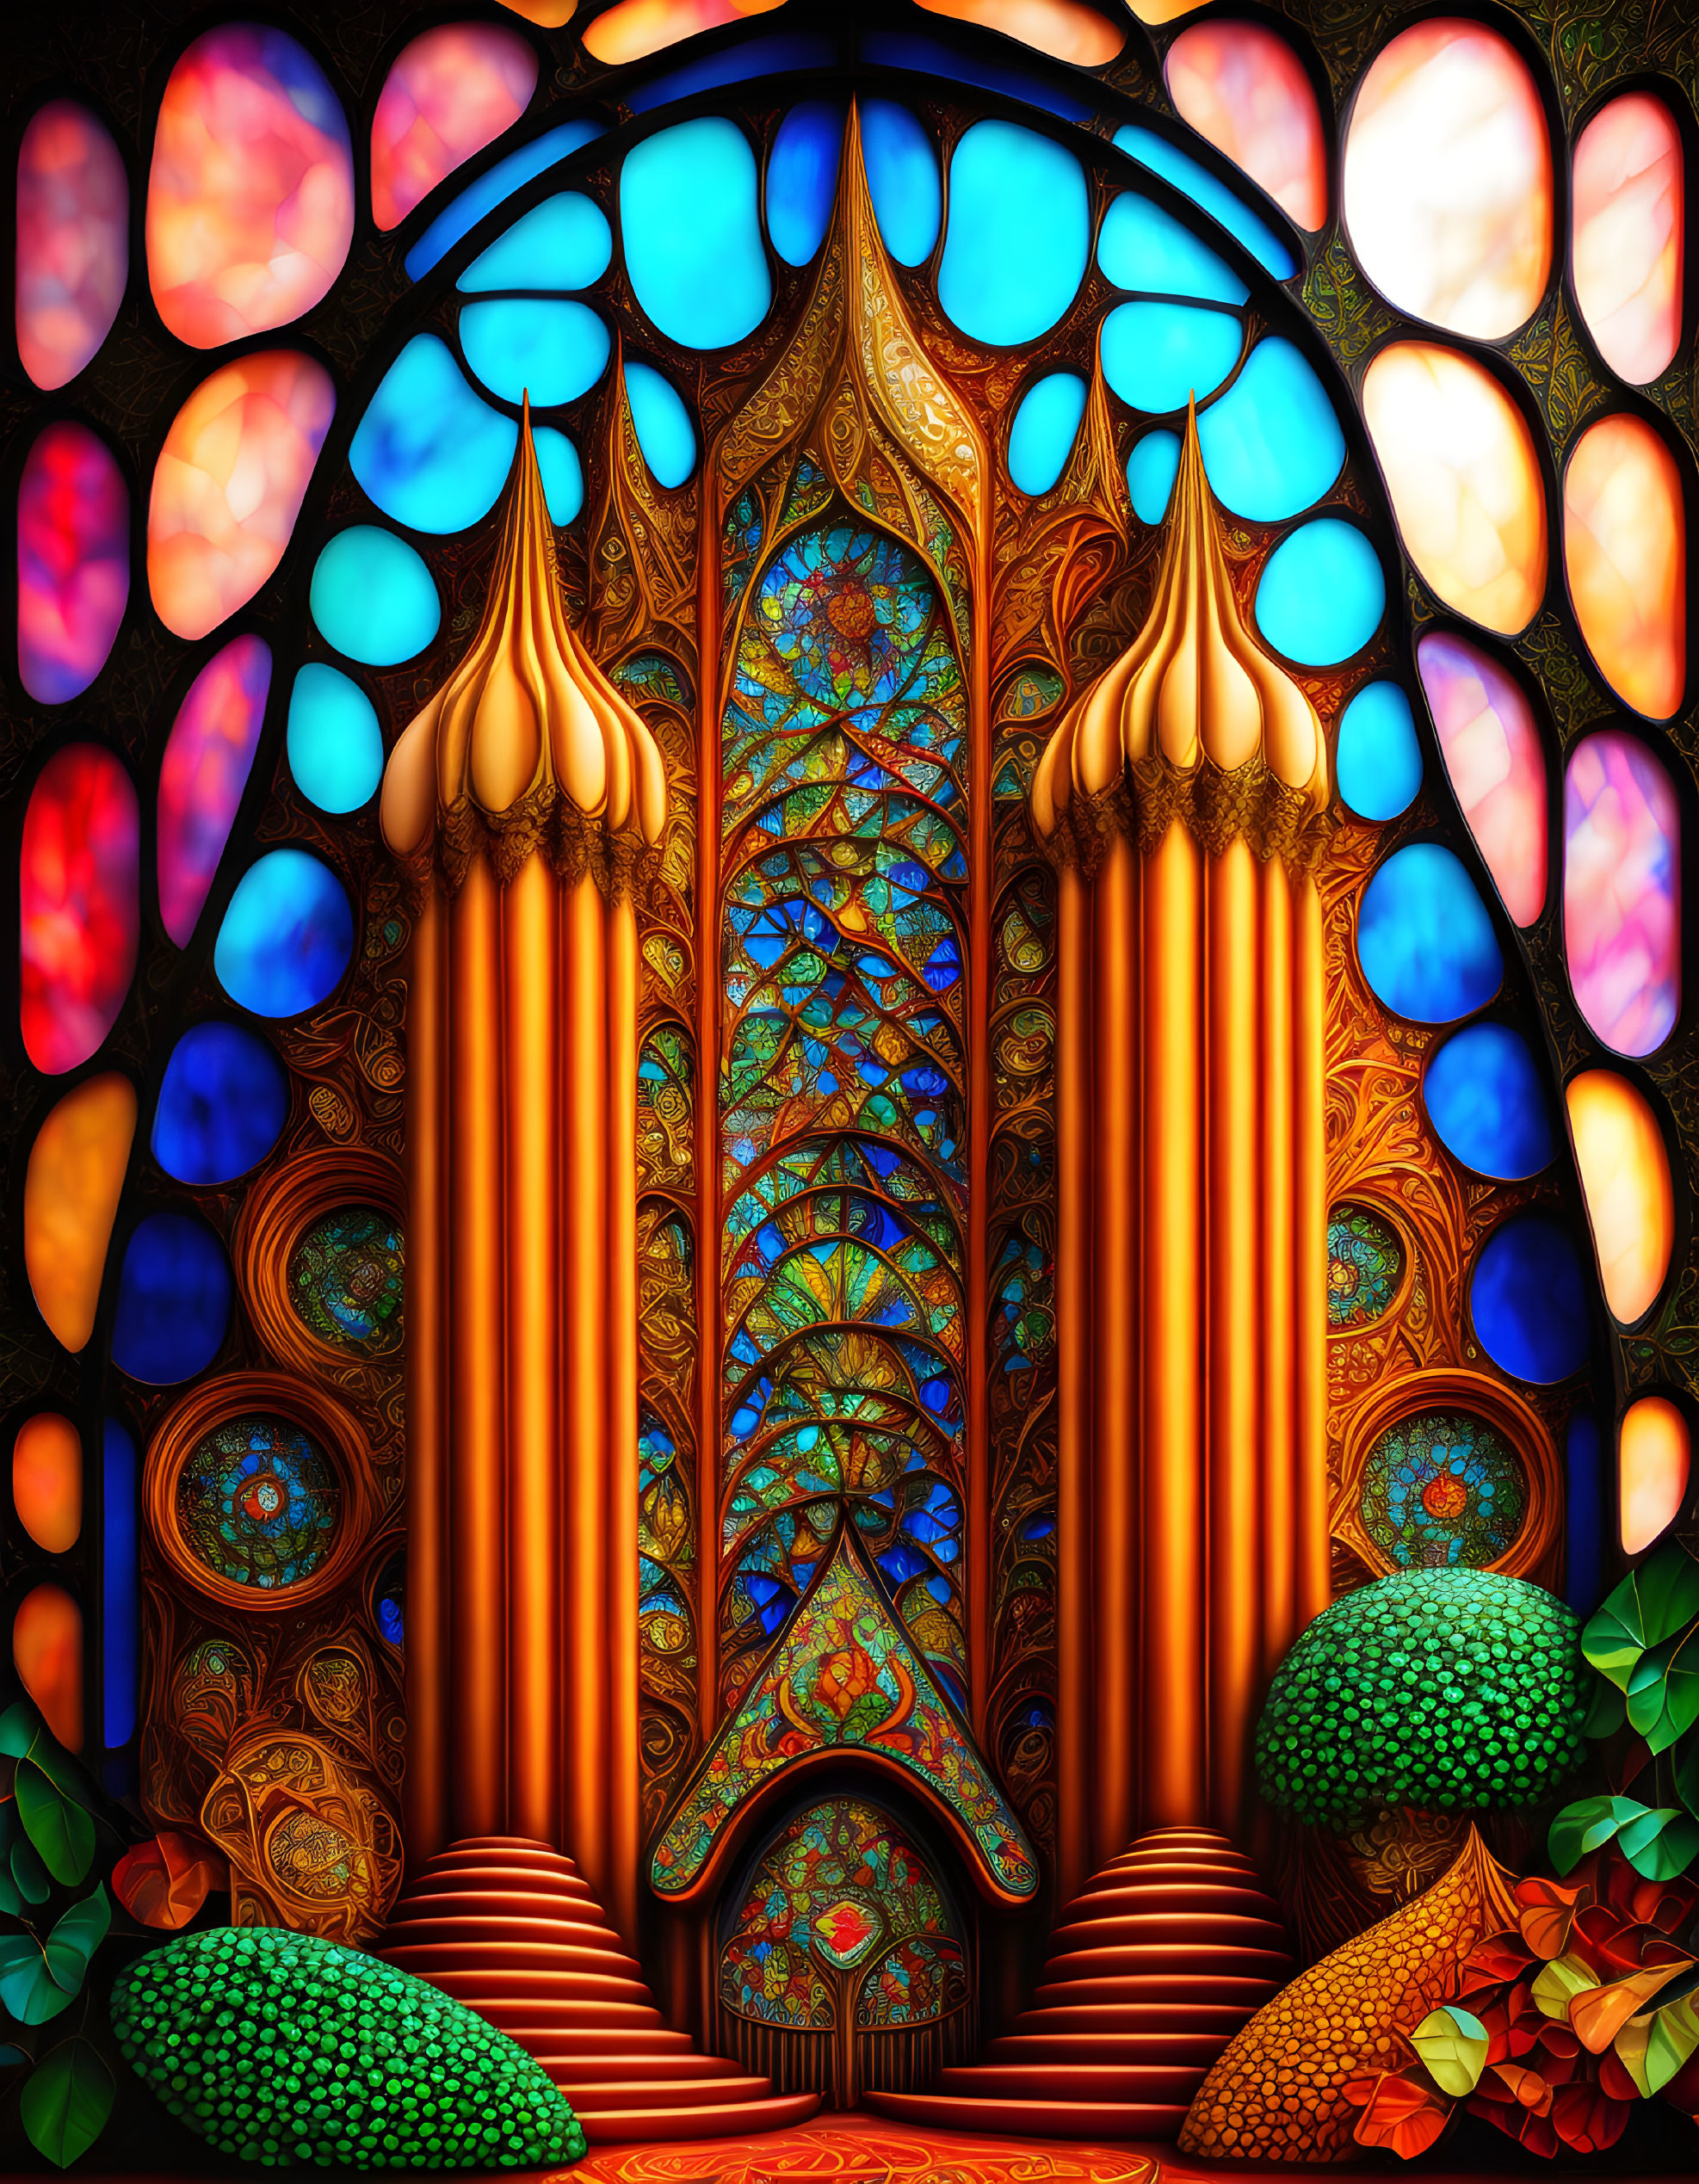 Colorful stained glass window in ornate, arched interior with stylized trees